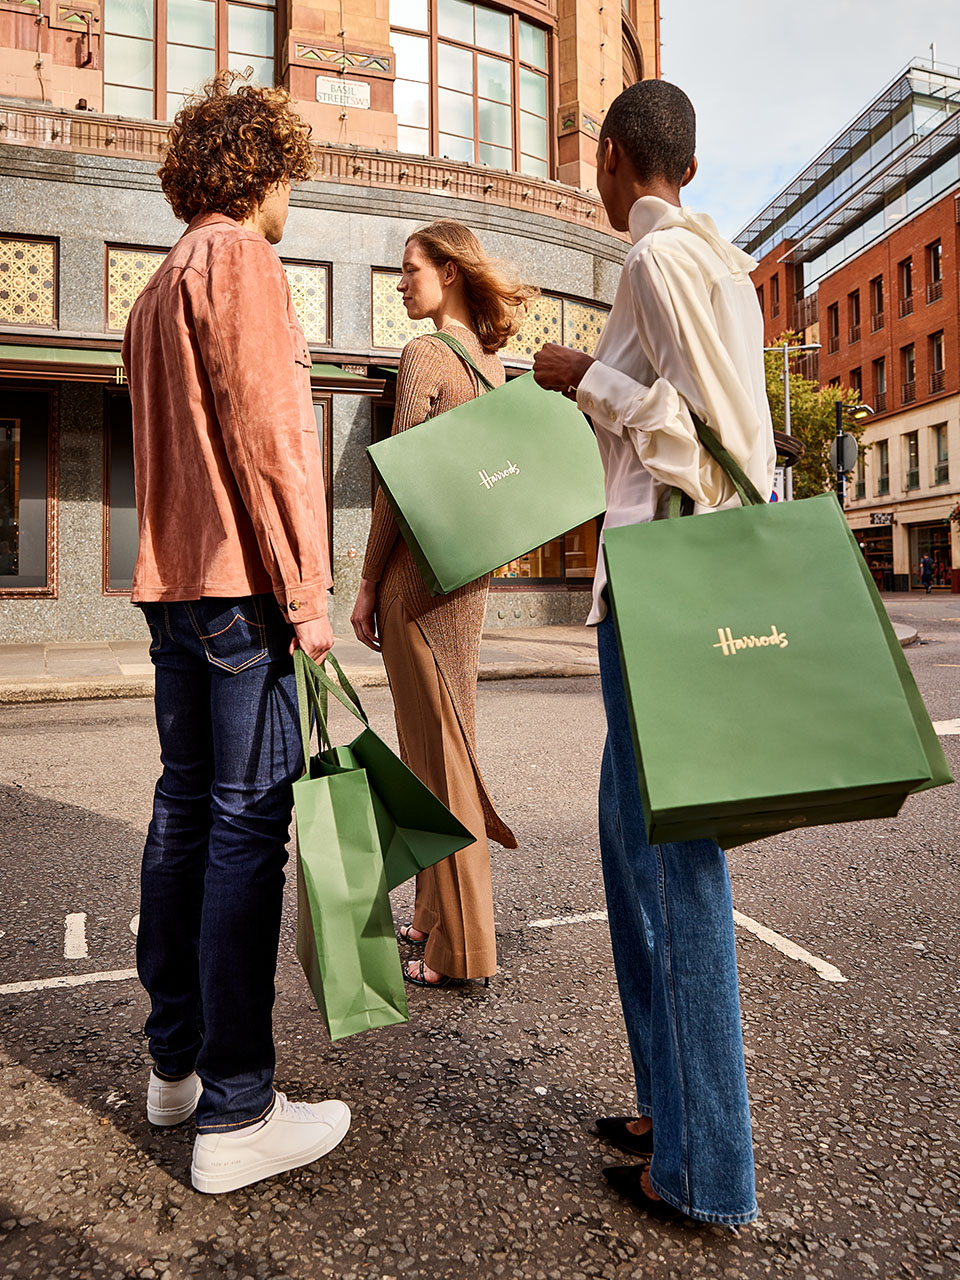 Group of friends standing outside the Harrods store holding icon green bag